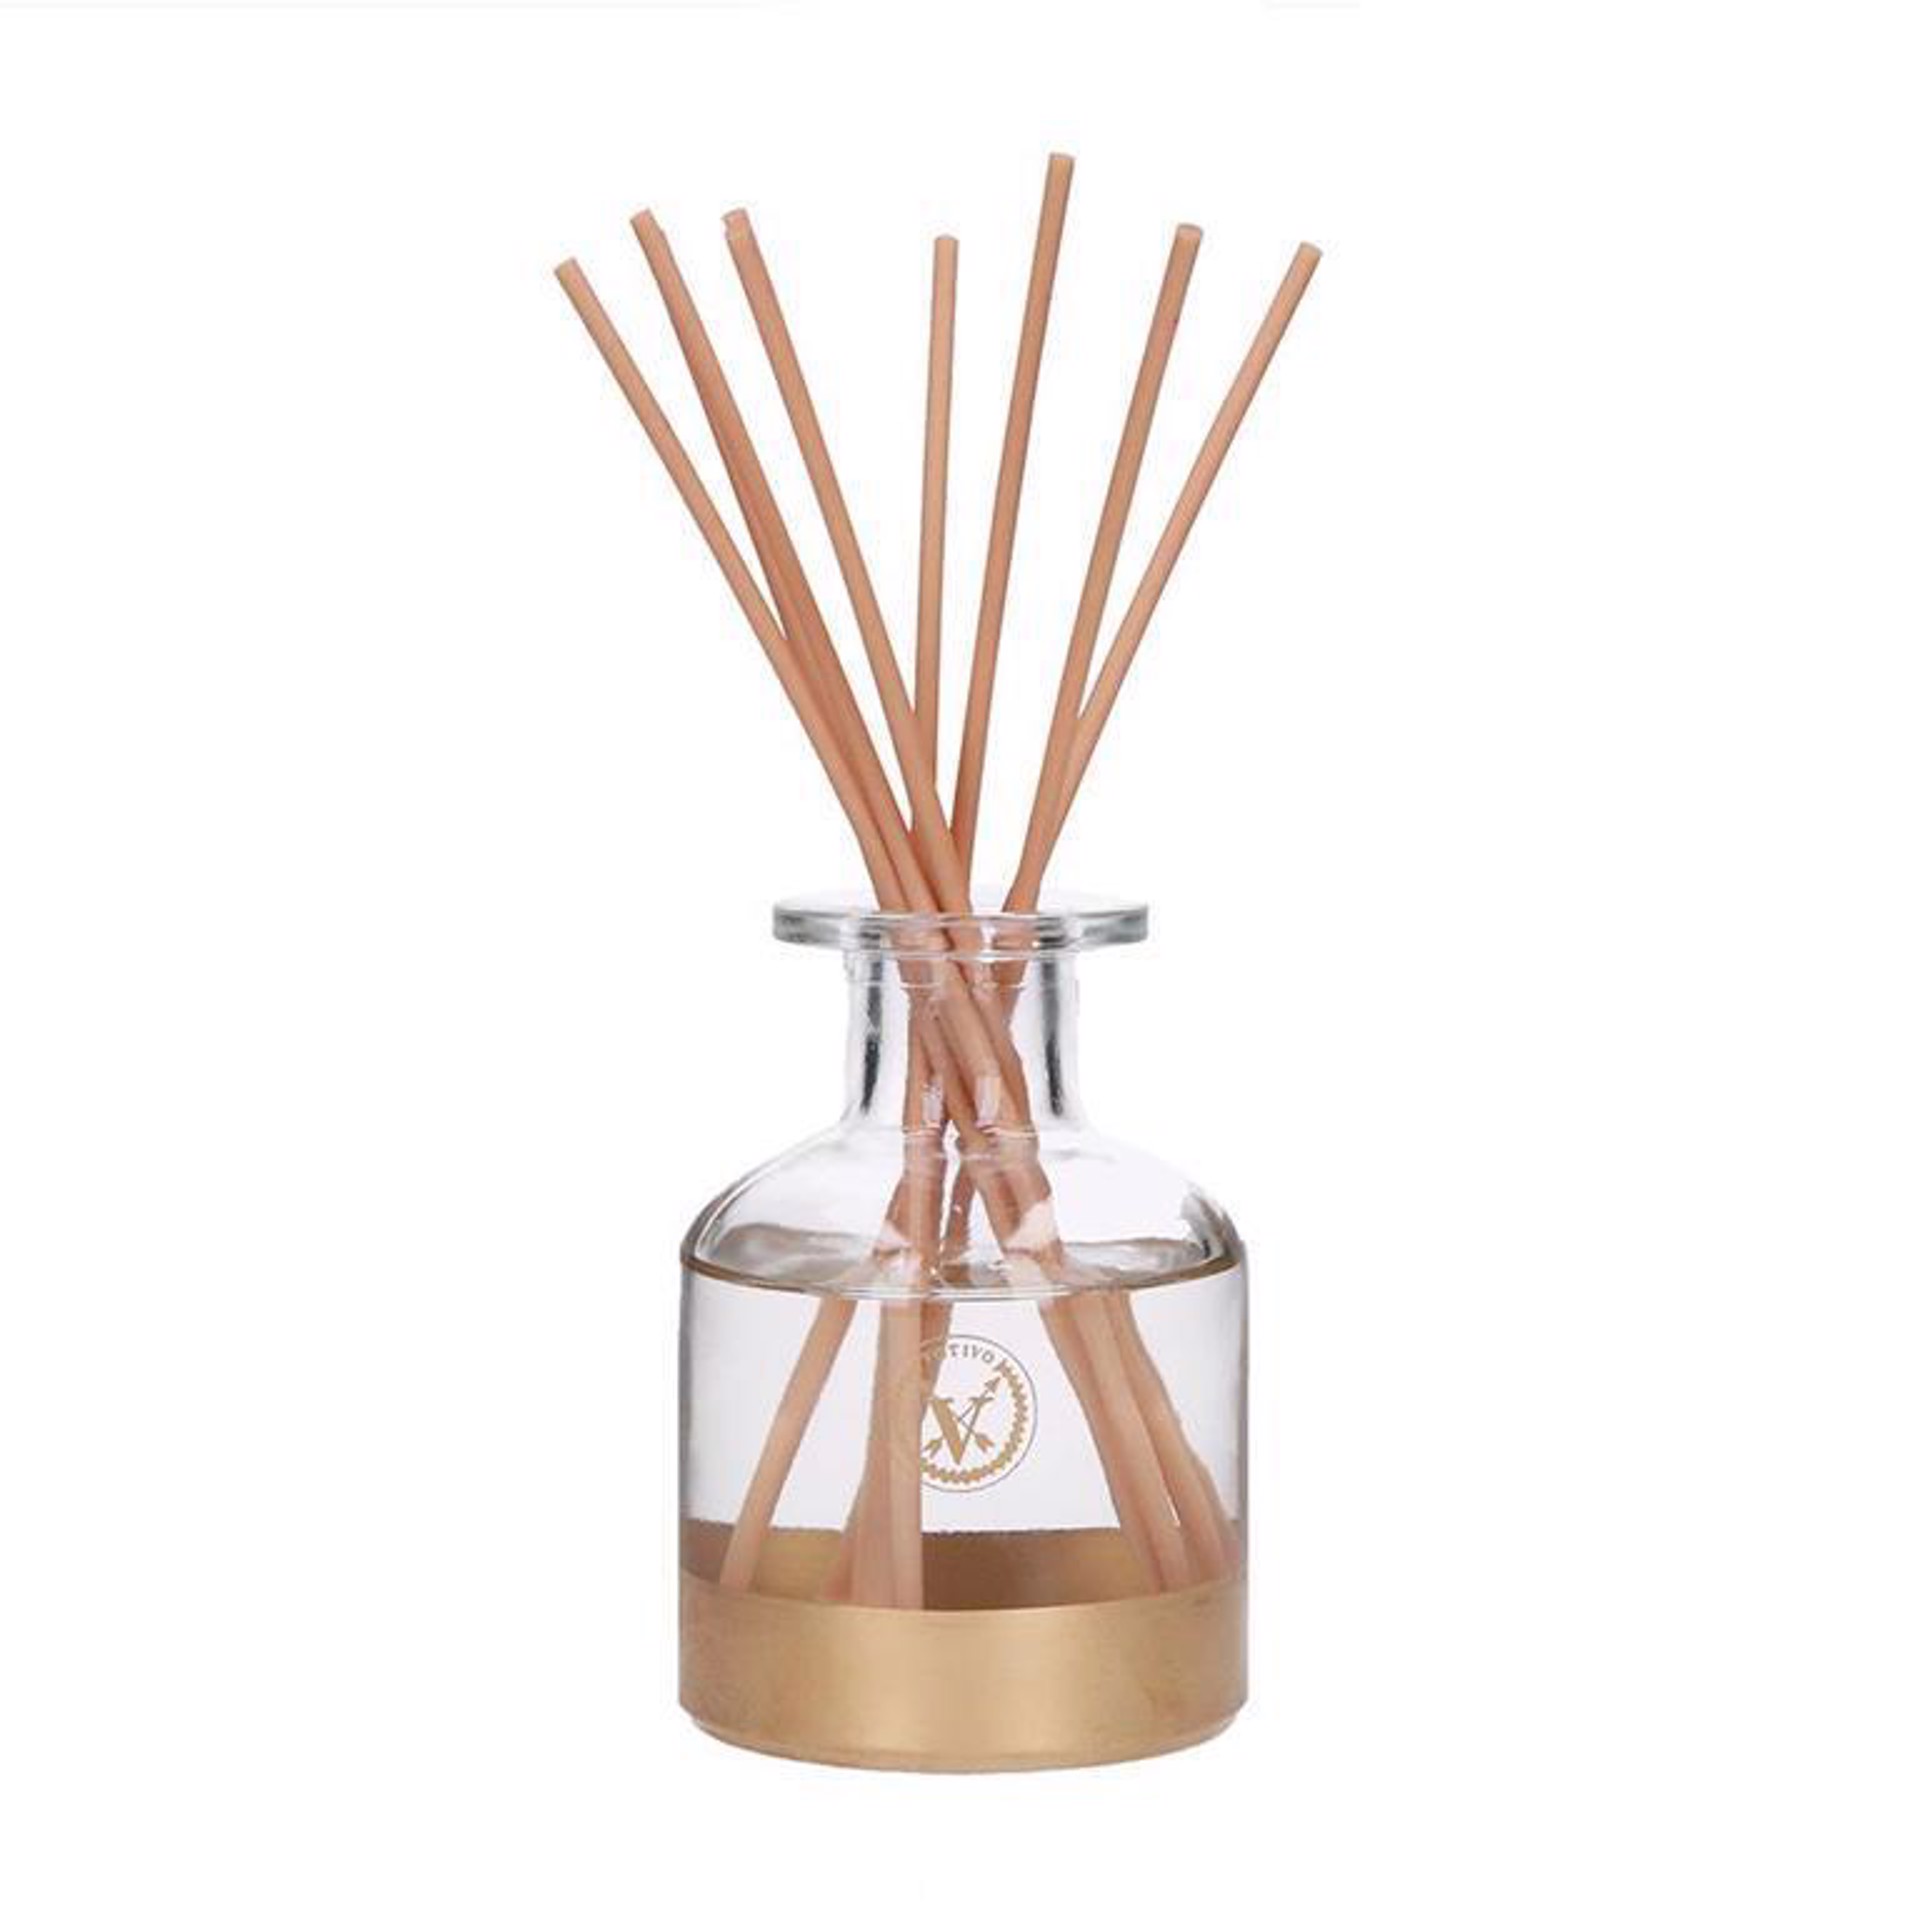 Icy Blue Pine Diffuser by Votivo